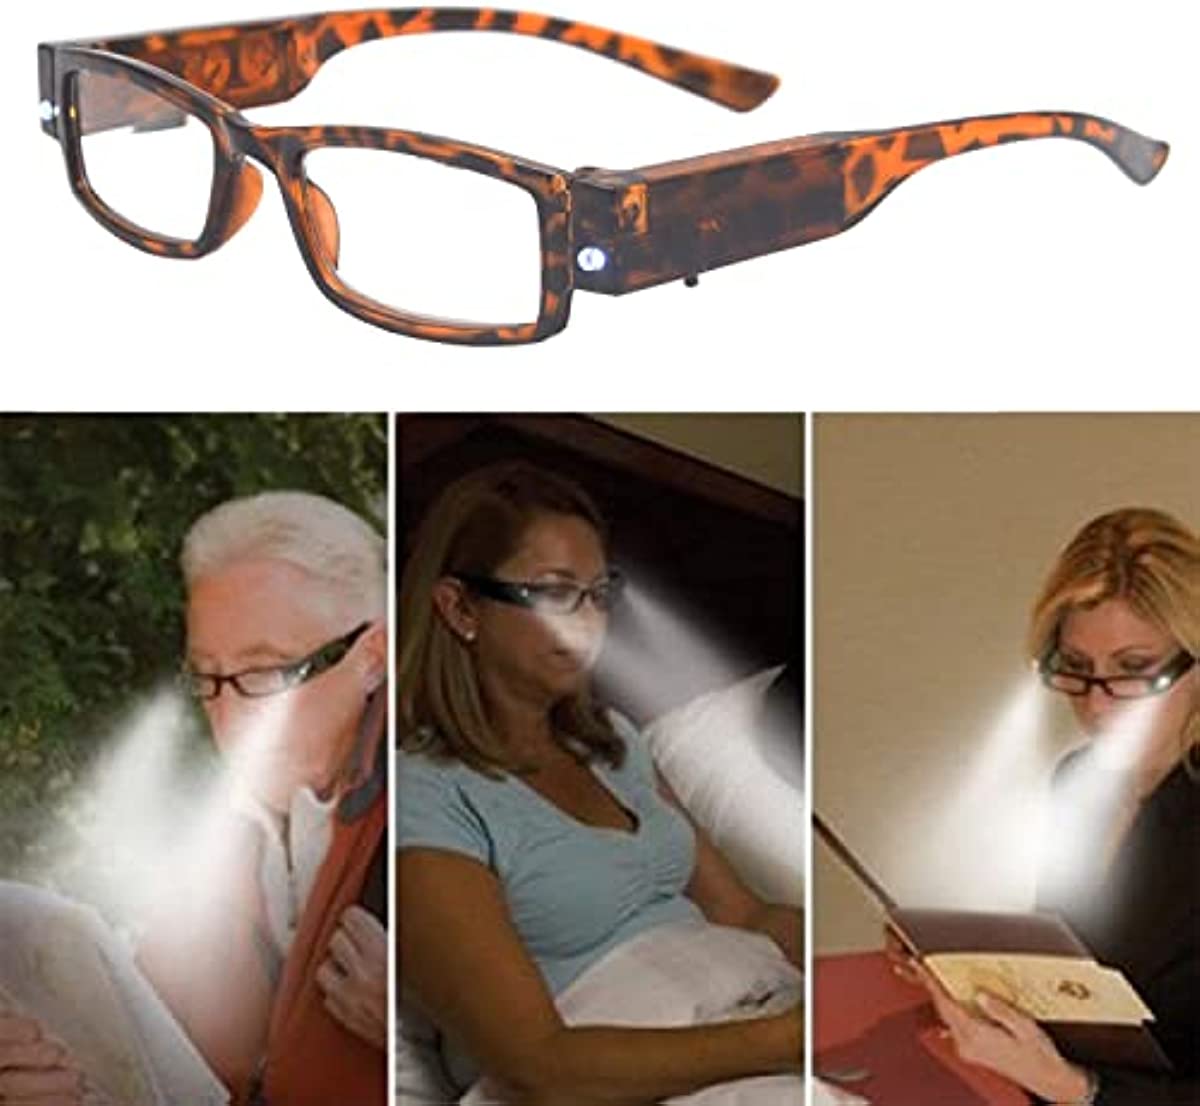 3 Pack Unisex Rectangular Bright LED Readers Nighttime Reading Glasses with Lights